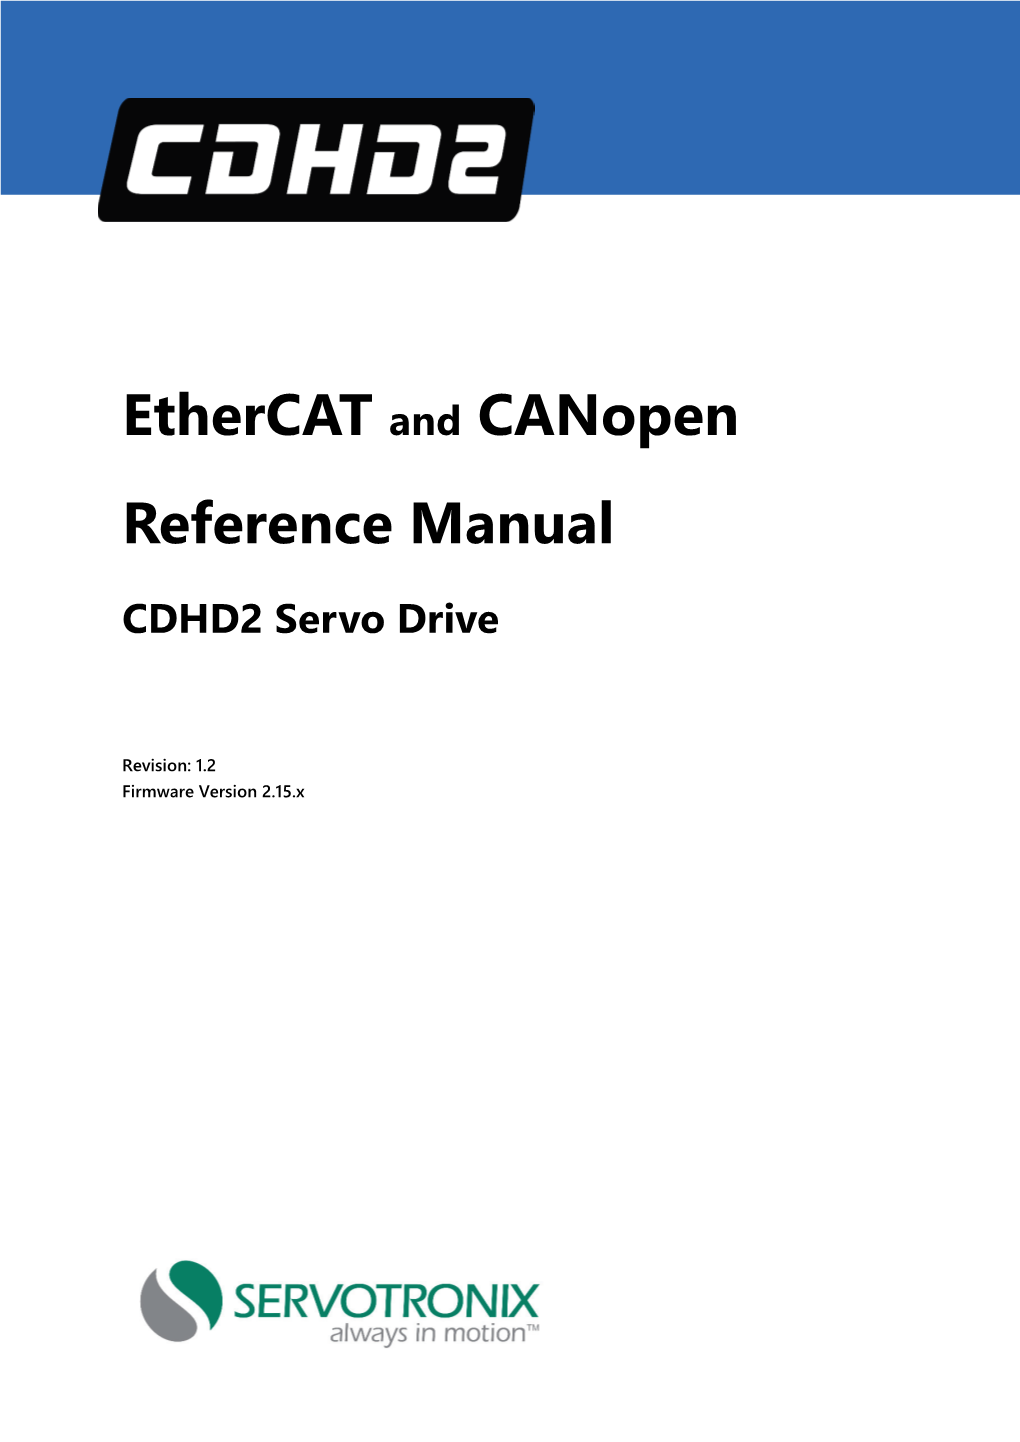 Ethercat and Canopen Reference Manual